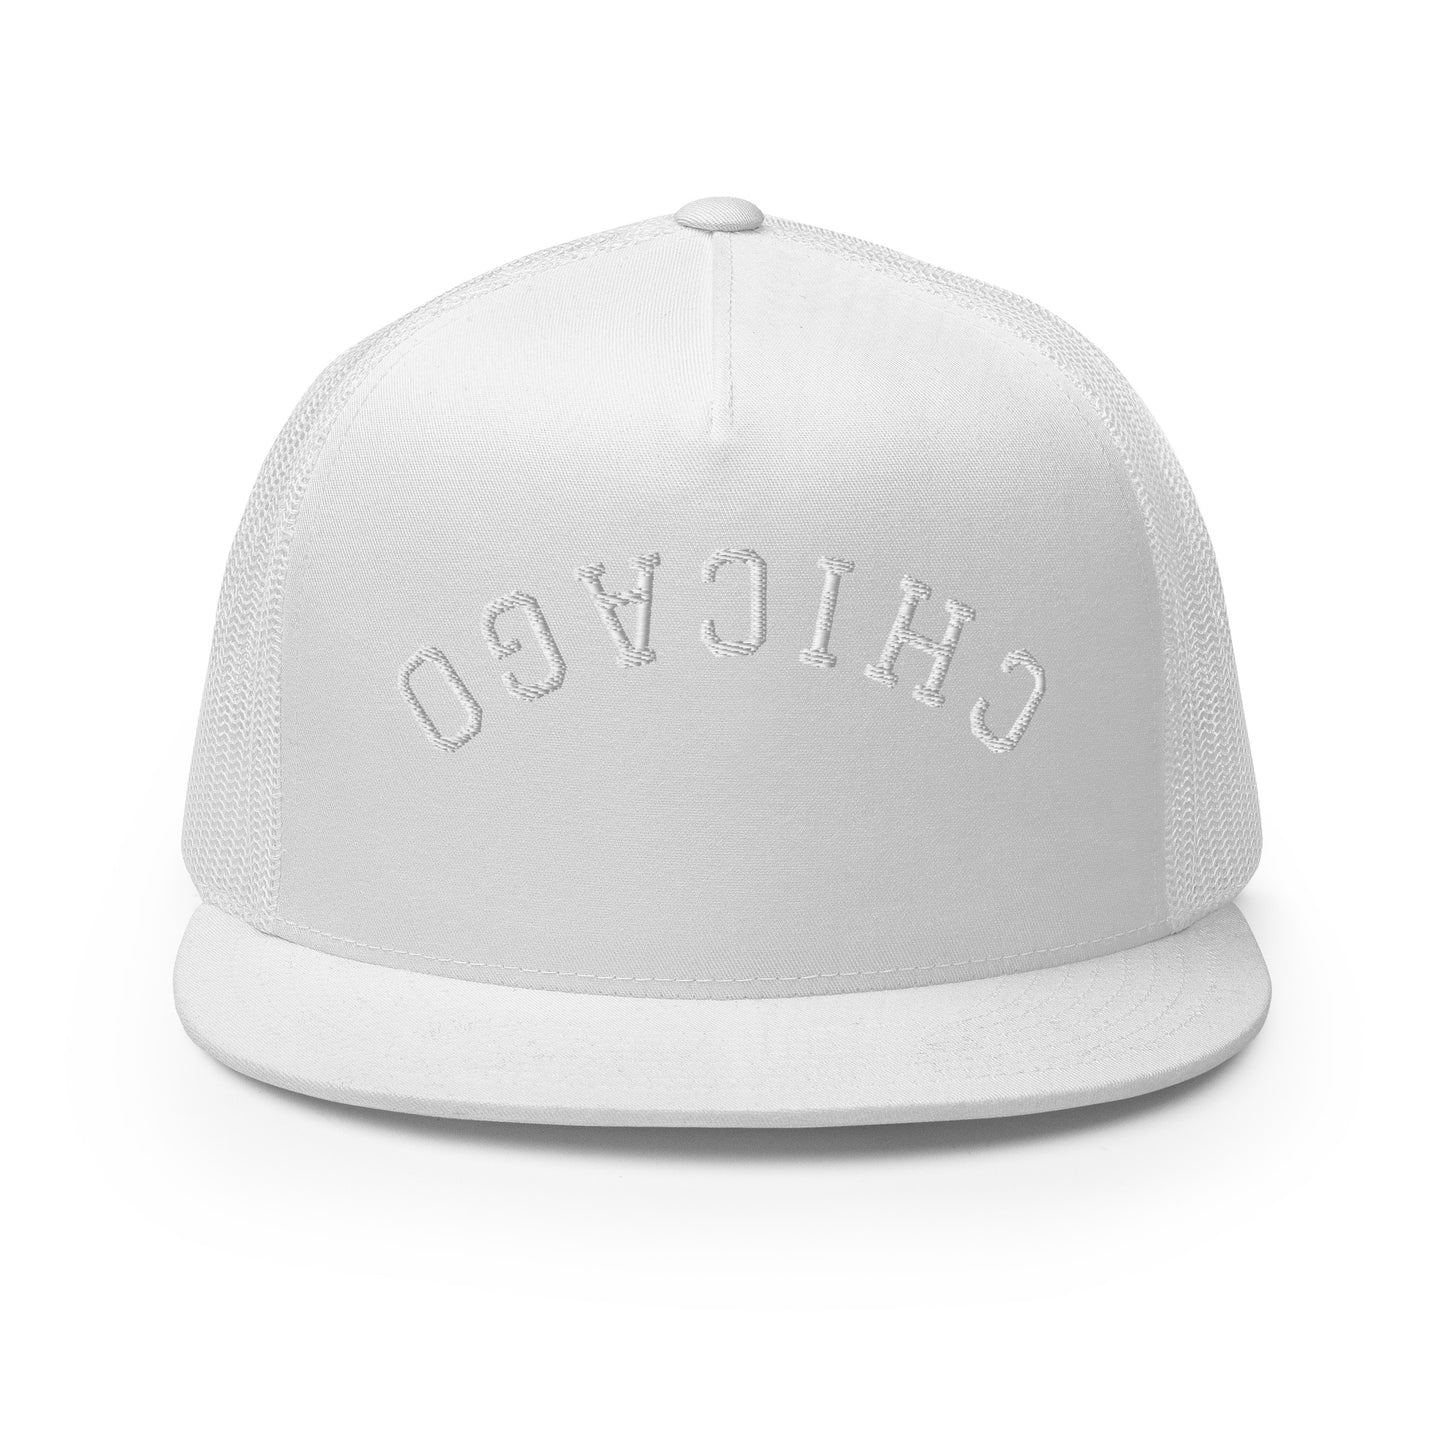 Chicago Upside Down Arch High 5 Panel A-Frame Snapback Trucker Hat